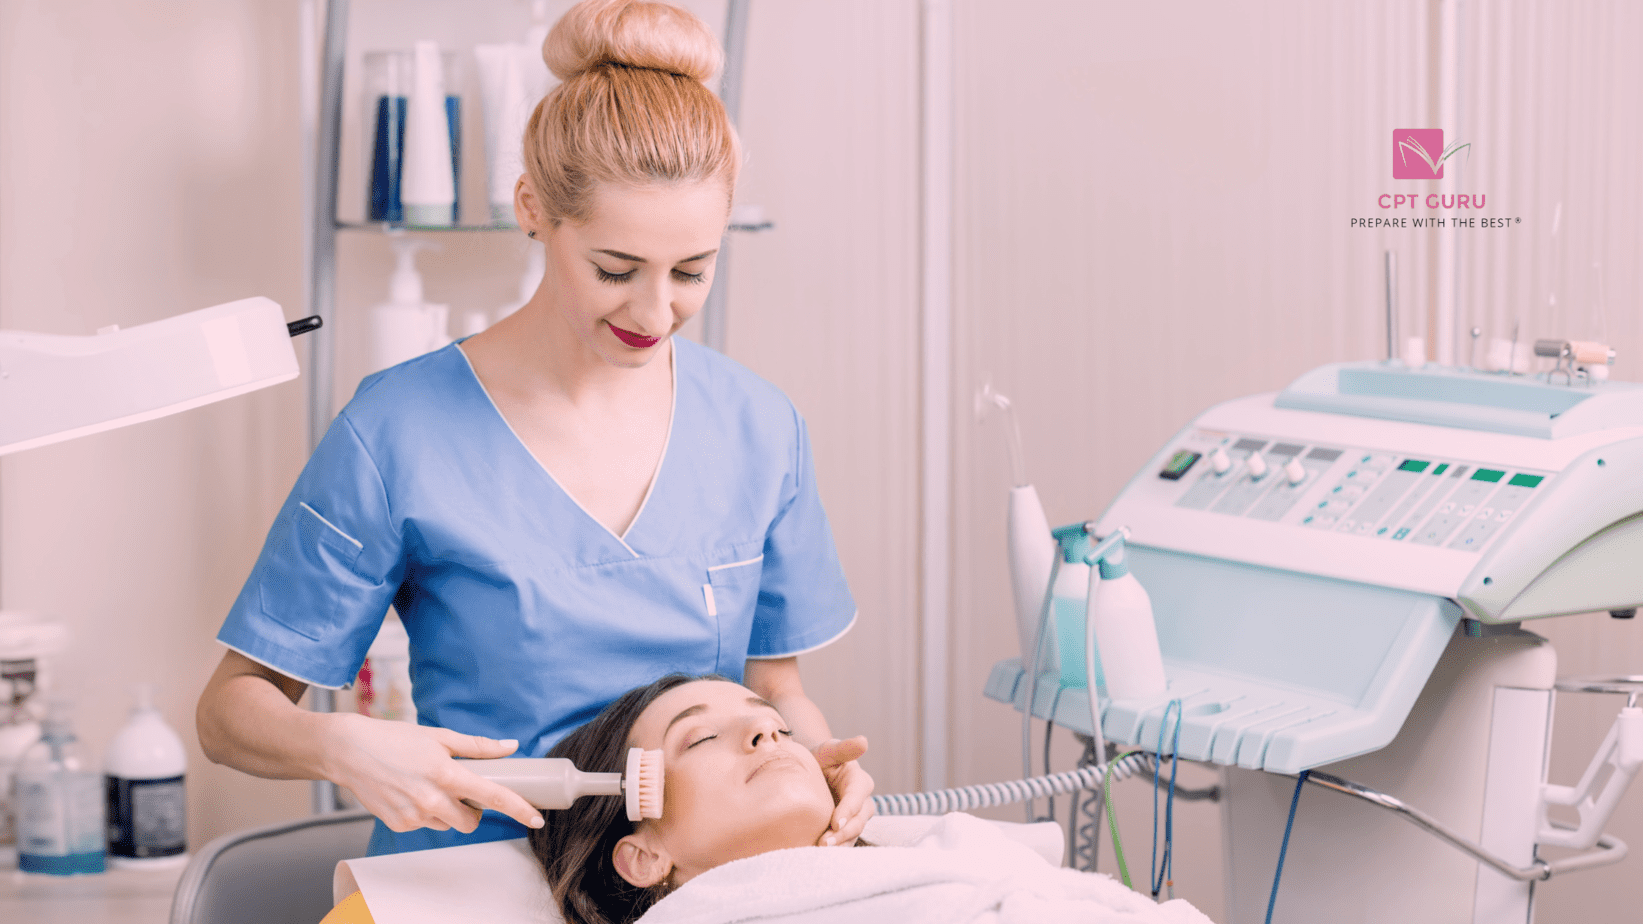 What treatments can and can't a cosmetologist perform?